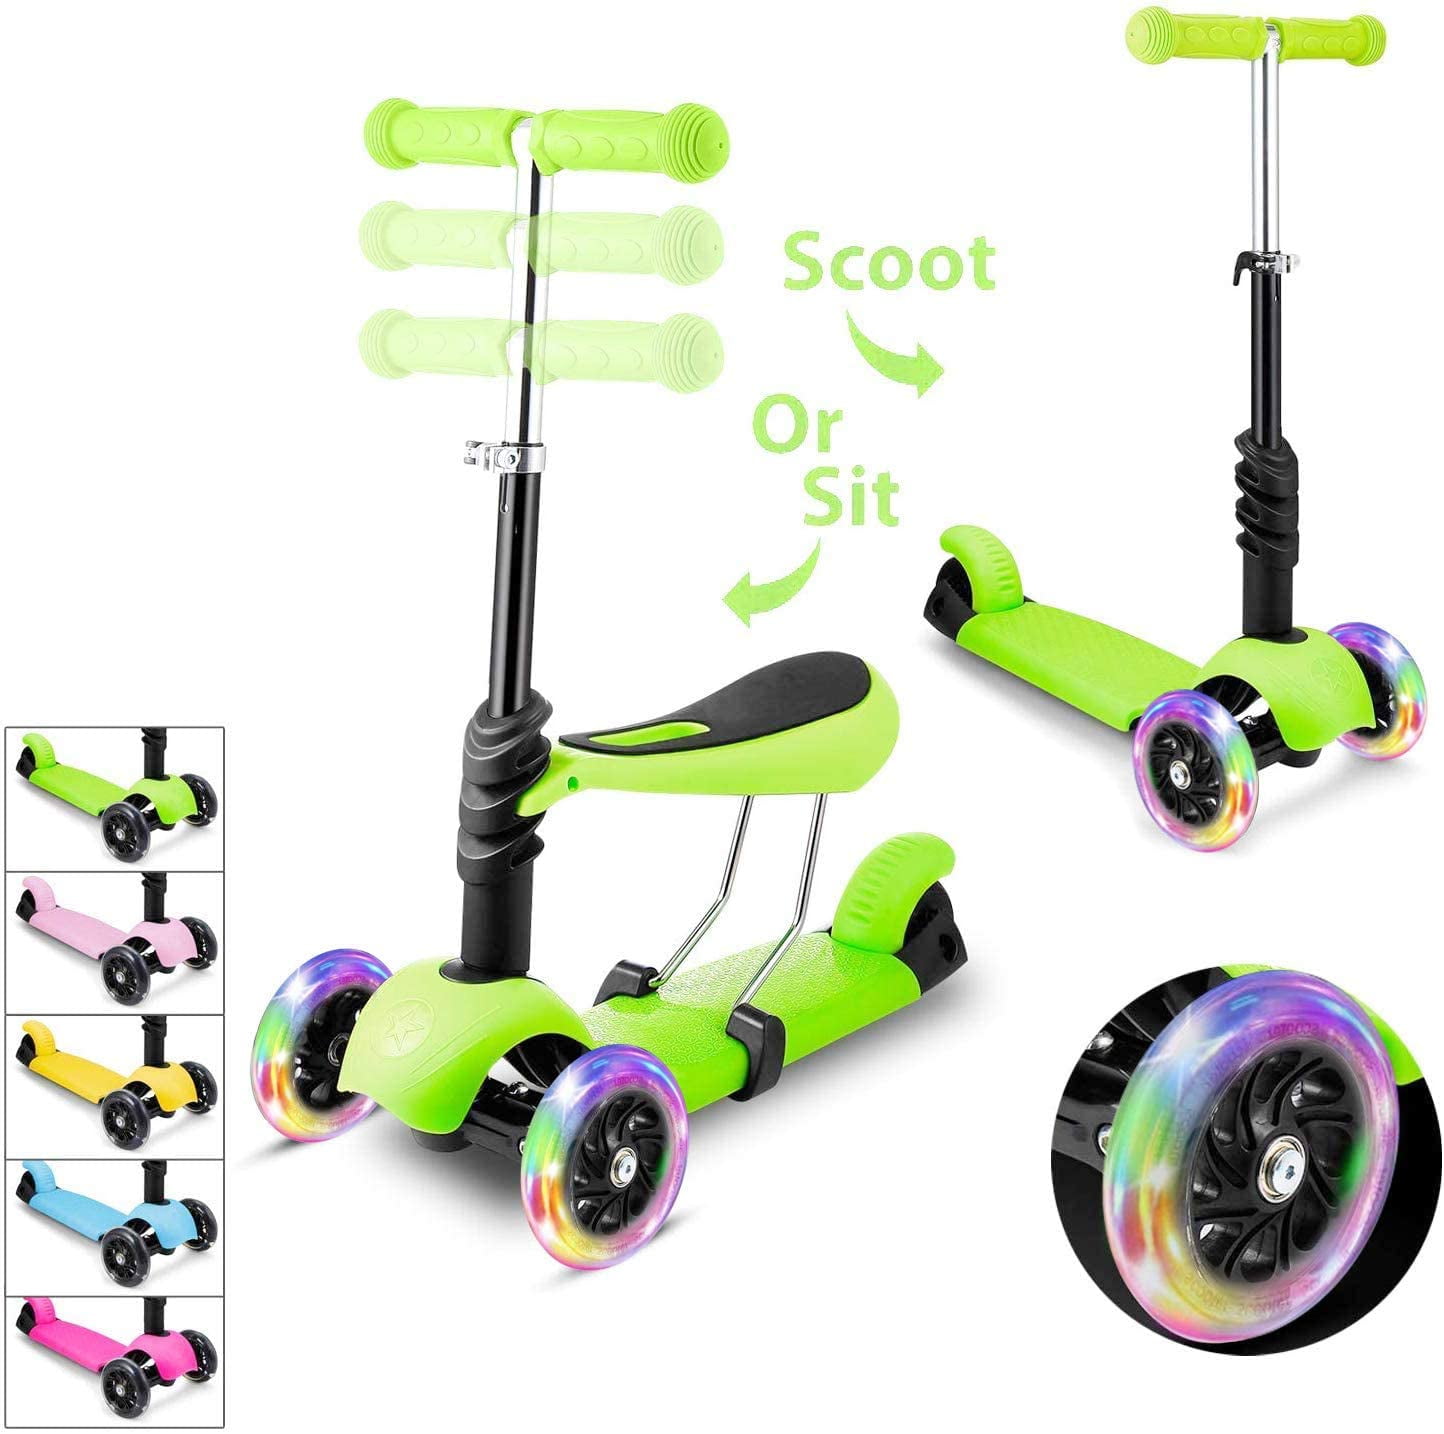 Details about   Kids Kick Scooter 3-Wheel Foldable Adjustable Flashing Wheels Gift for h 40 